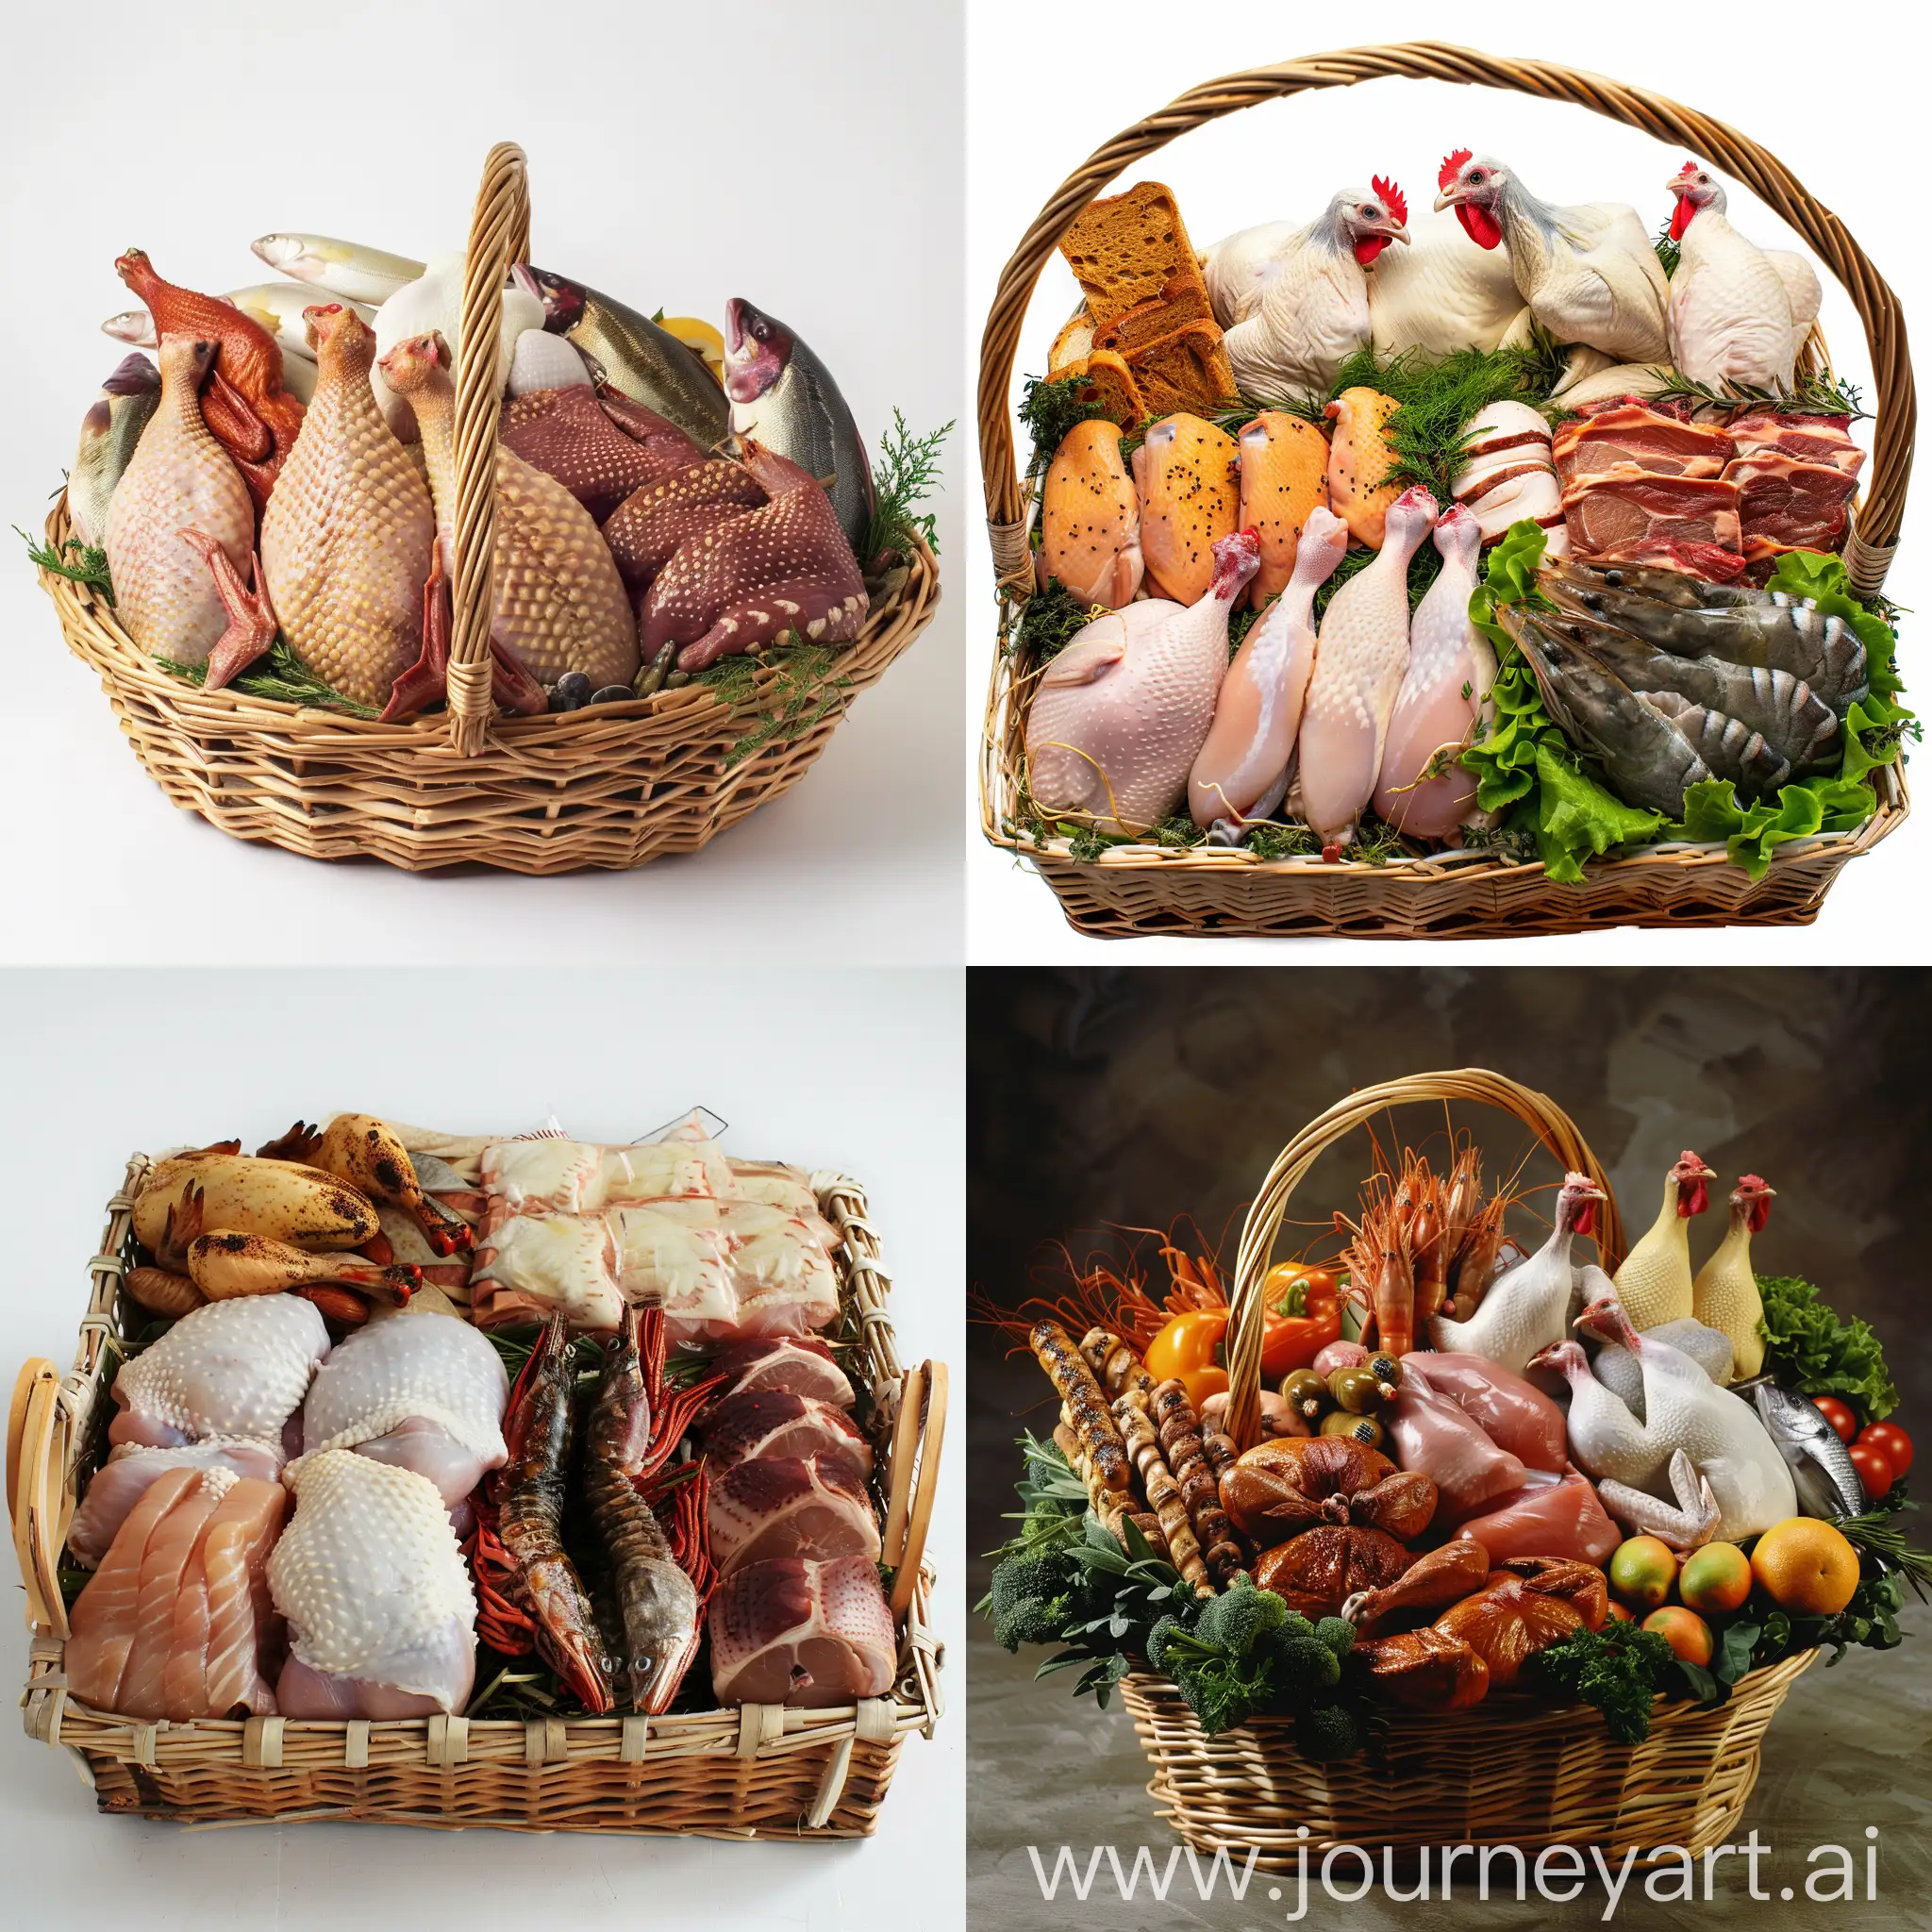 Photo of a basket full of poultry and aquatic products